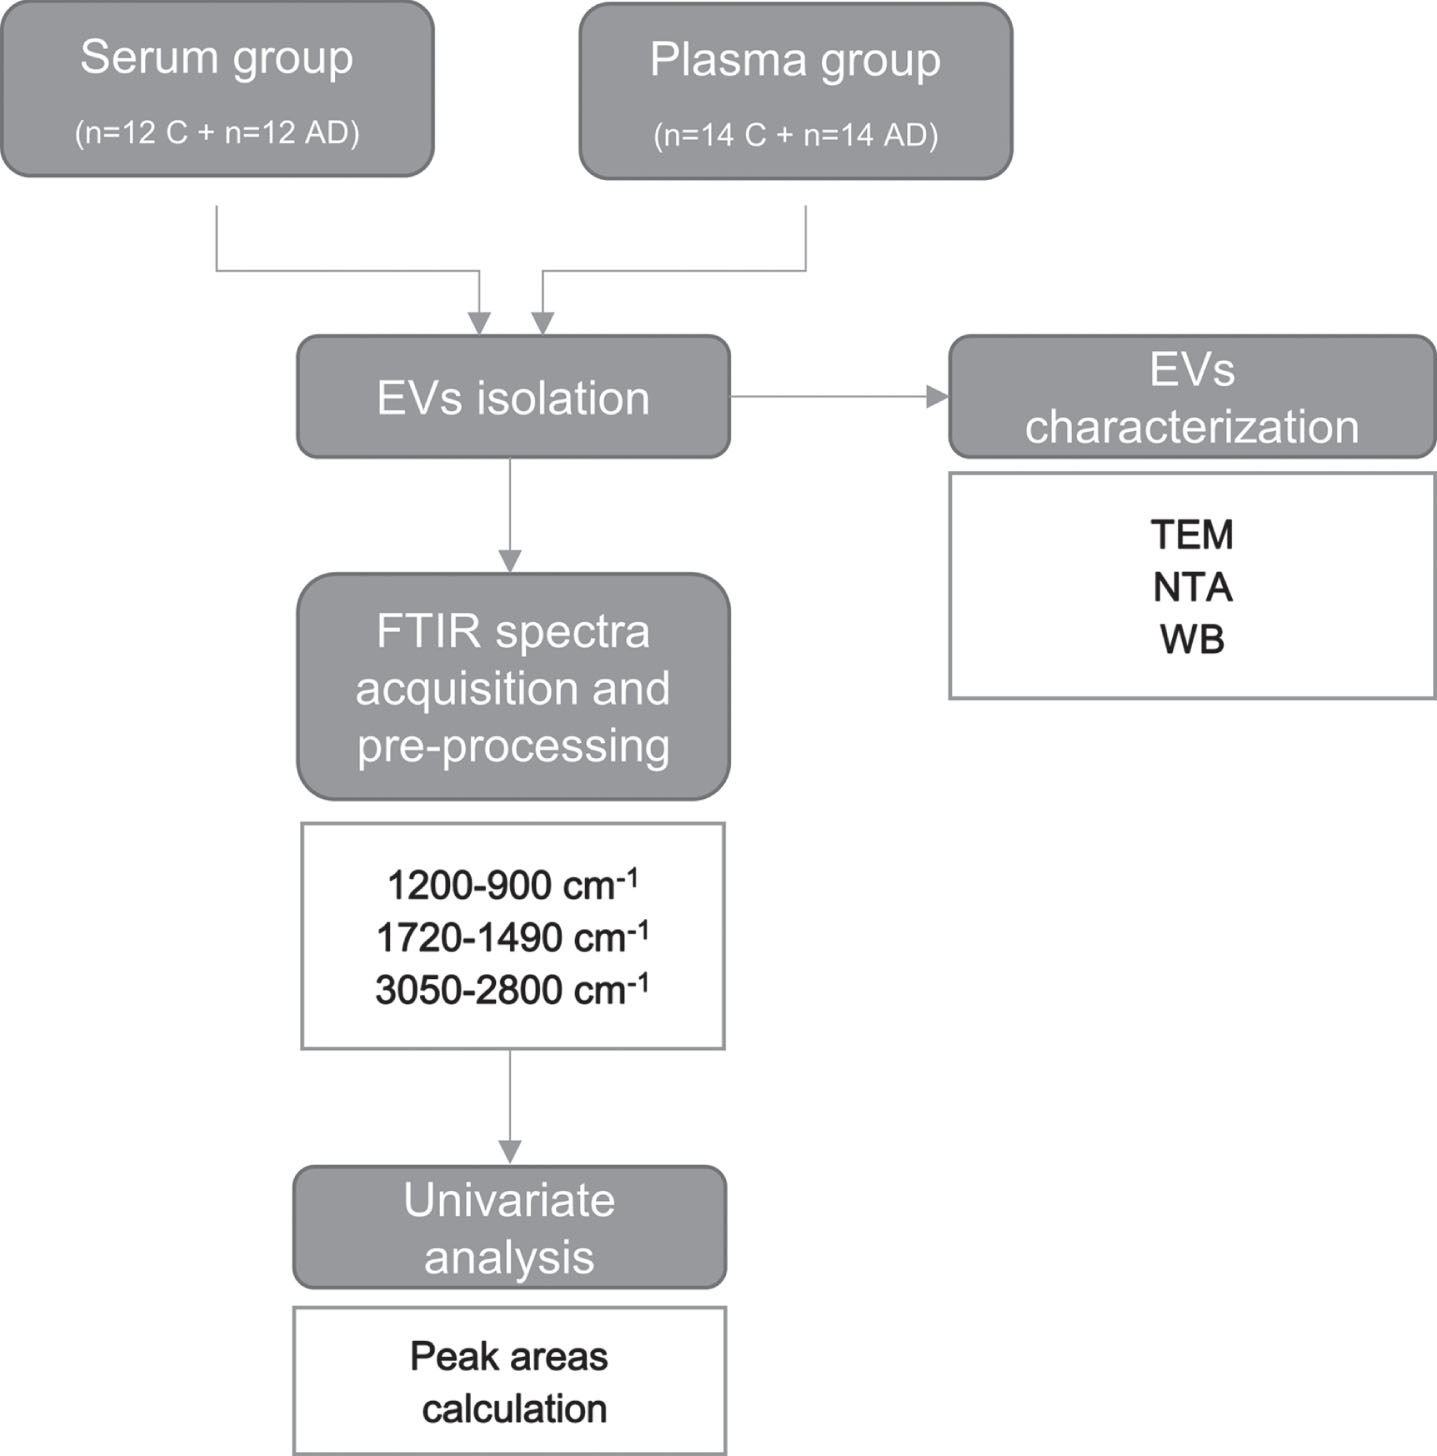 Workflow for FTIR analysis of serum- and plasma-derived EVs. EVs were isolated from serum or plasma of two distinct sets of individuals (Controls and AD cases). Blood-derived EVs were characterized by transmission electron microscopy (TEM), nanoparticle tracking analysis (NTA) and western blot (WB) analysis. FTIR spectra was acquired from serum- and plasma-derived EVs and pre-processed in the 1200–900 cm–1, 1720–1490 cm–1 and 3050–2800 cm–1 regions. A univariate analysis consisting in the calculation of the second derivative peak area was carried out. Serum-derived EVs characterization and univariate analysis results for the 1200–900 cm–1 spectral region, mainly assigned to carbohydrates and nucleic acids have been previously published by us [26]. AD, Alzheimer’s disease; C, controls; EVs, extracellular vesicles; FTIR, Fourier Transform Infrared; NTA, nanoparticle tracking analysis; TEM, transmission electron microscopy; WB, western blot.